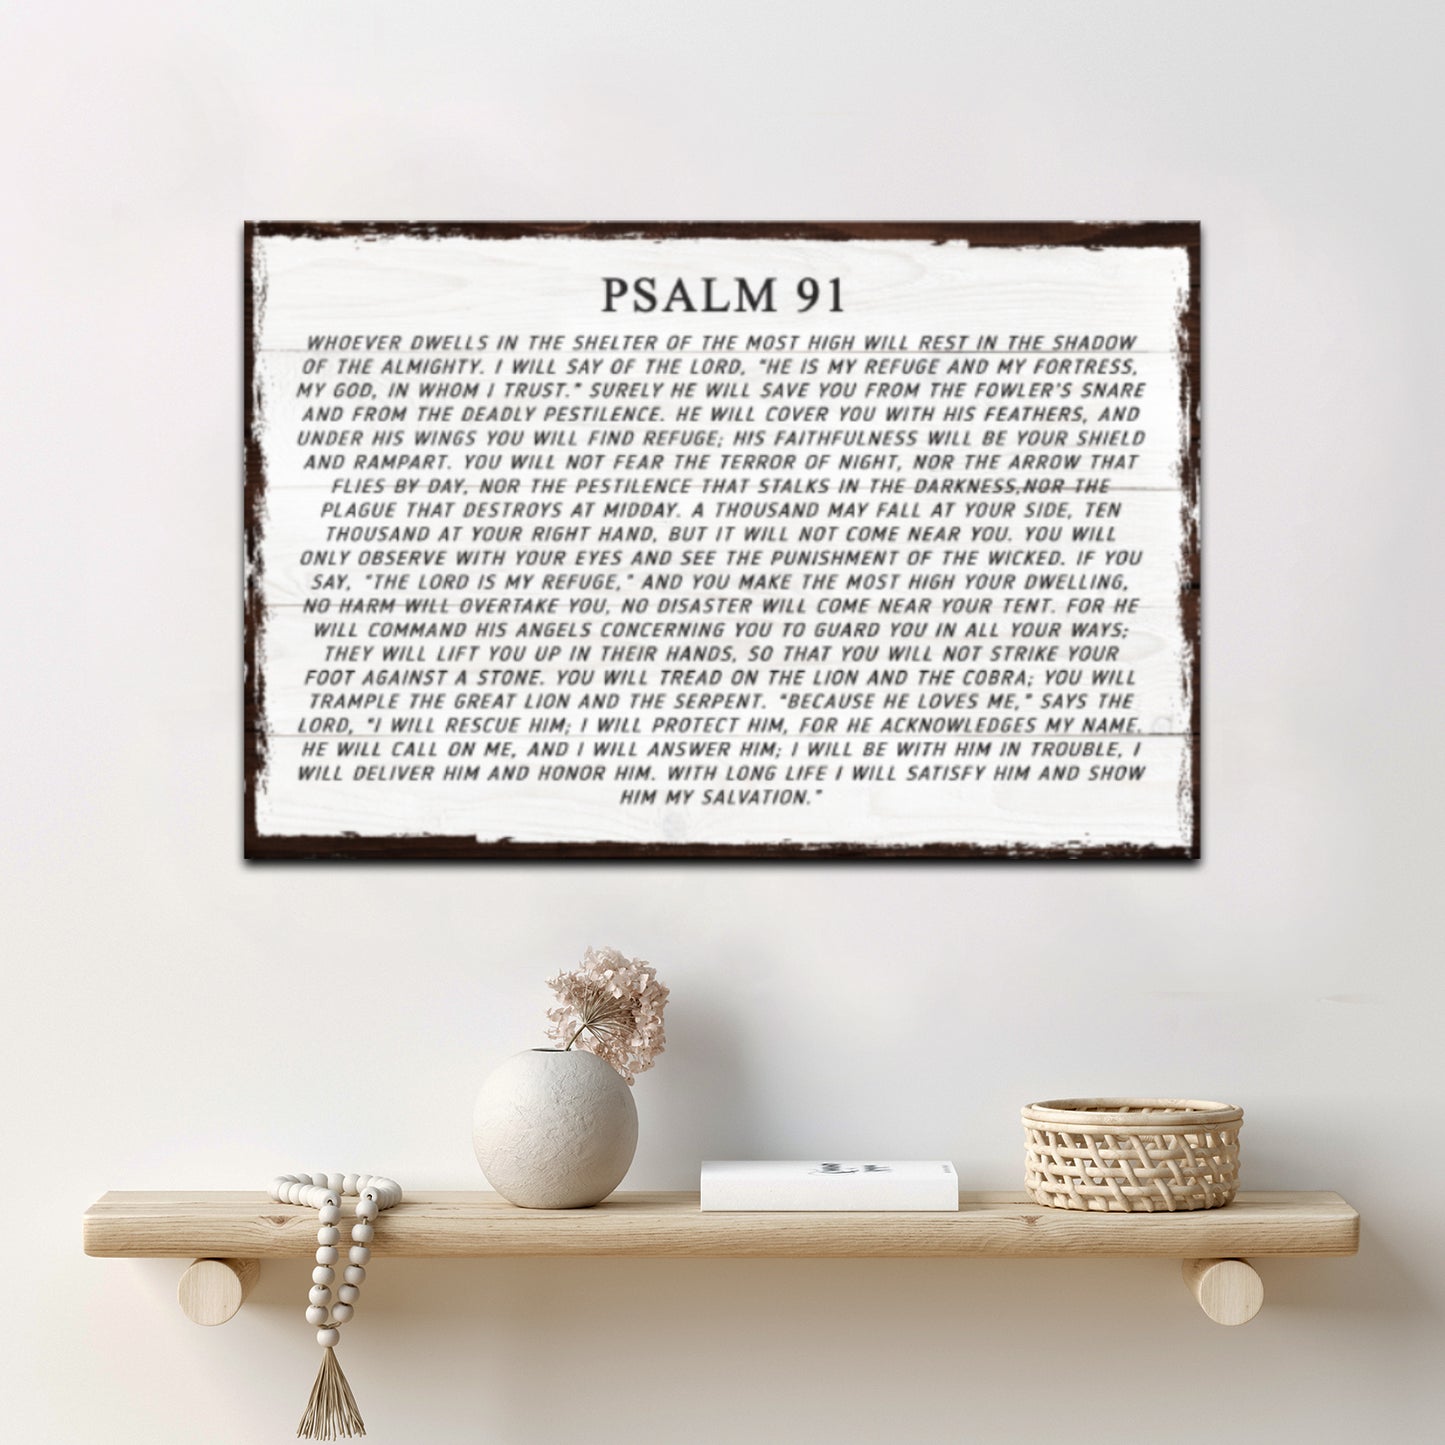 Psalm 91 Whoever Dwells Scripture Sign - Image by Tailored Canvases